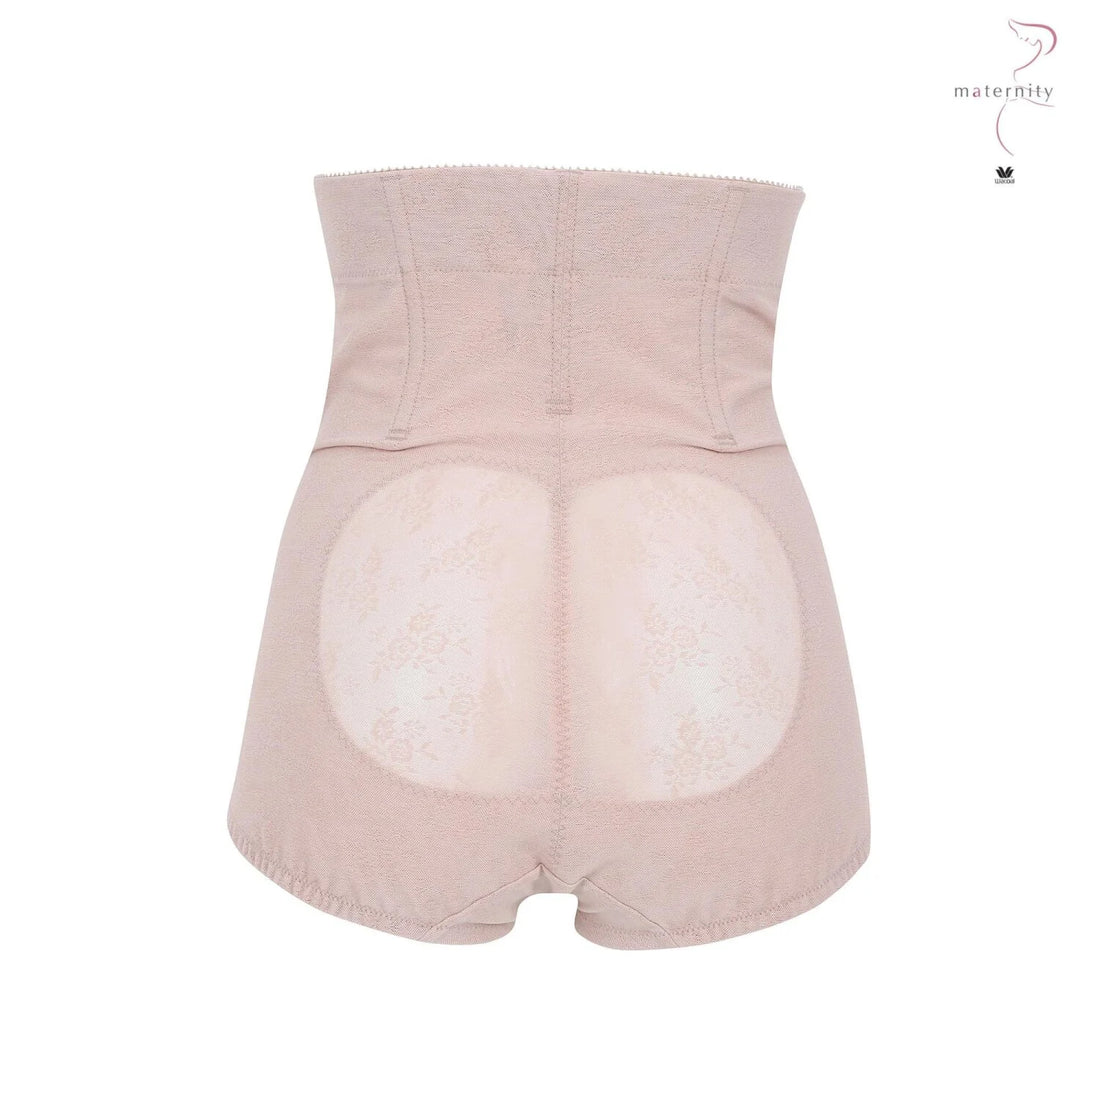 Wacoal Maternity Stay Stays for mothers after giving birth. High Waisted Shorts Model WM2056 Beige (BE)